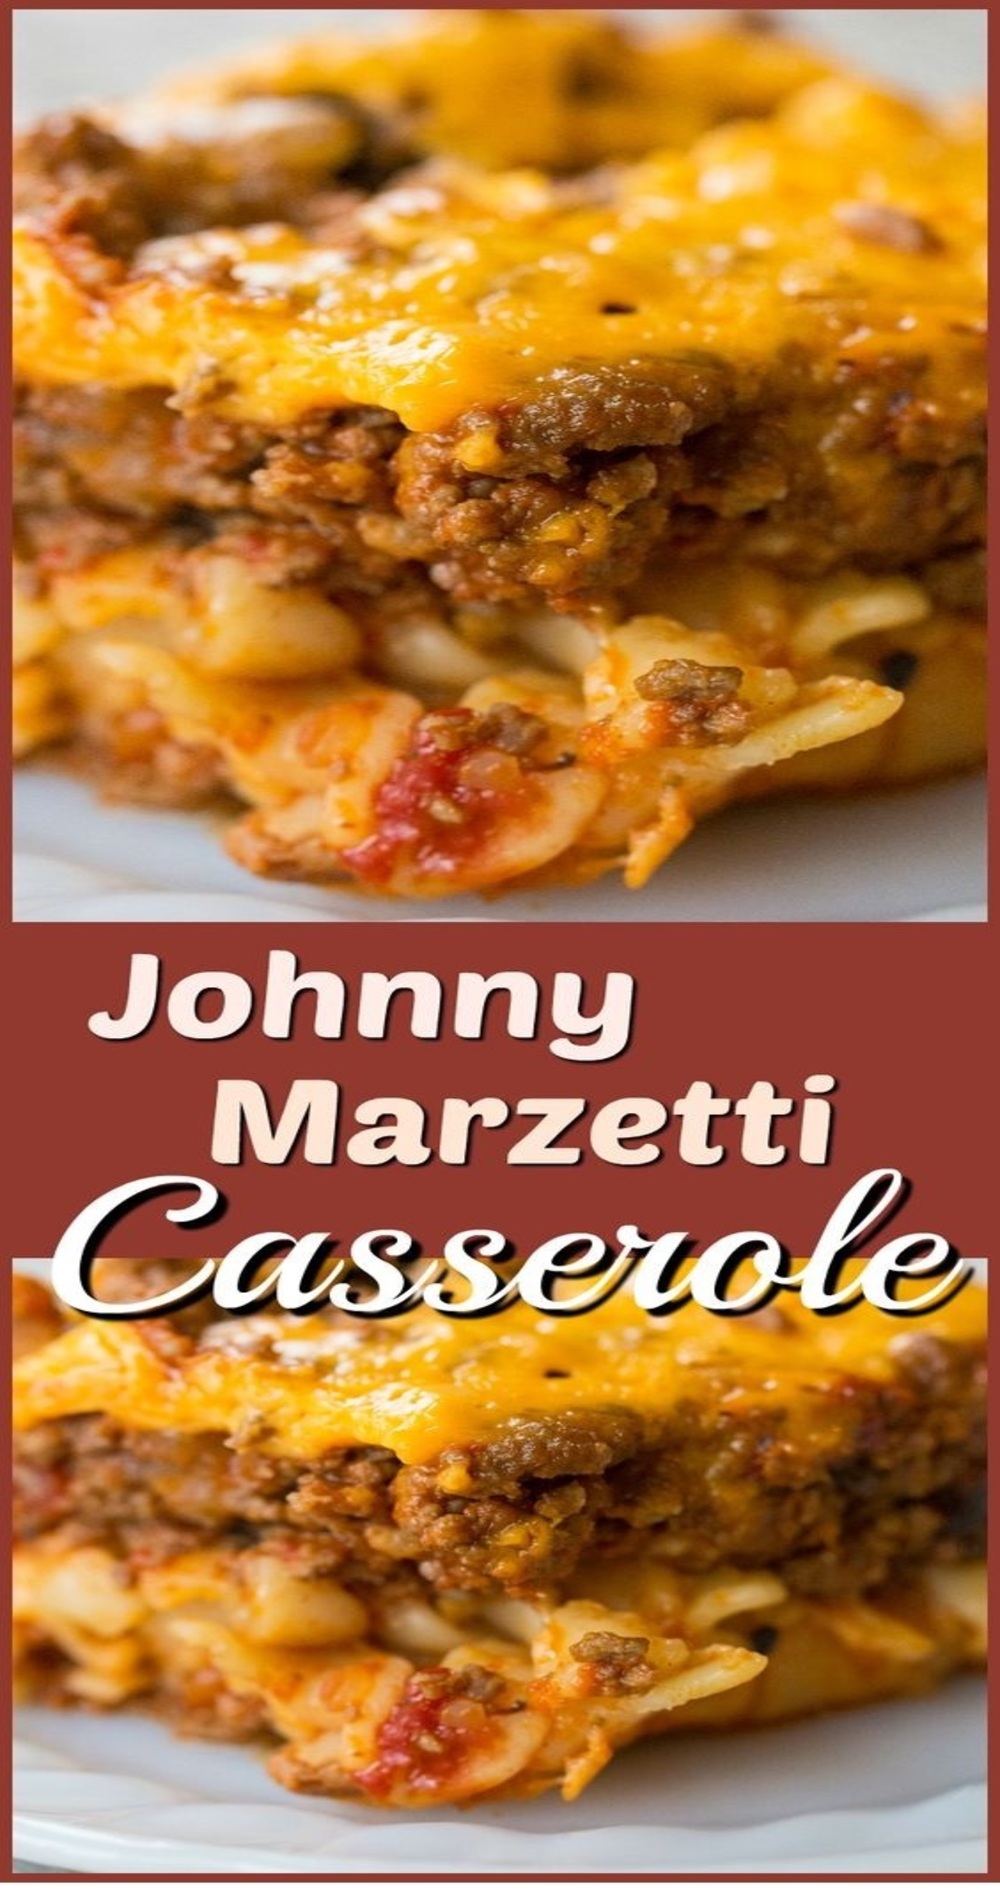 Johnny Marzetti Casserole - Slow Cooker or Oven!